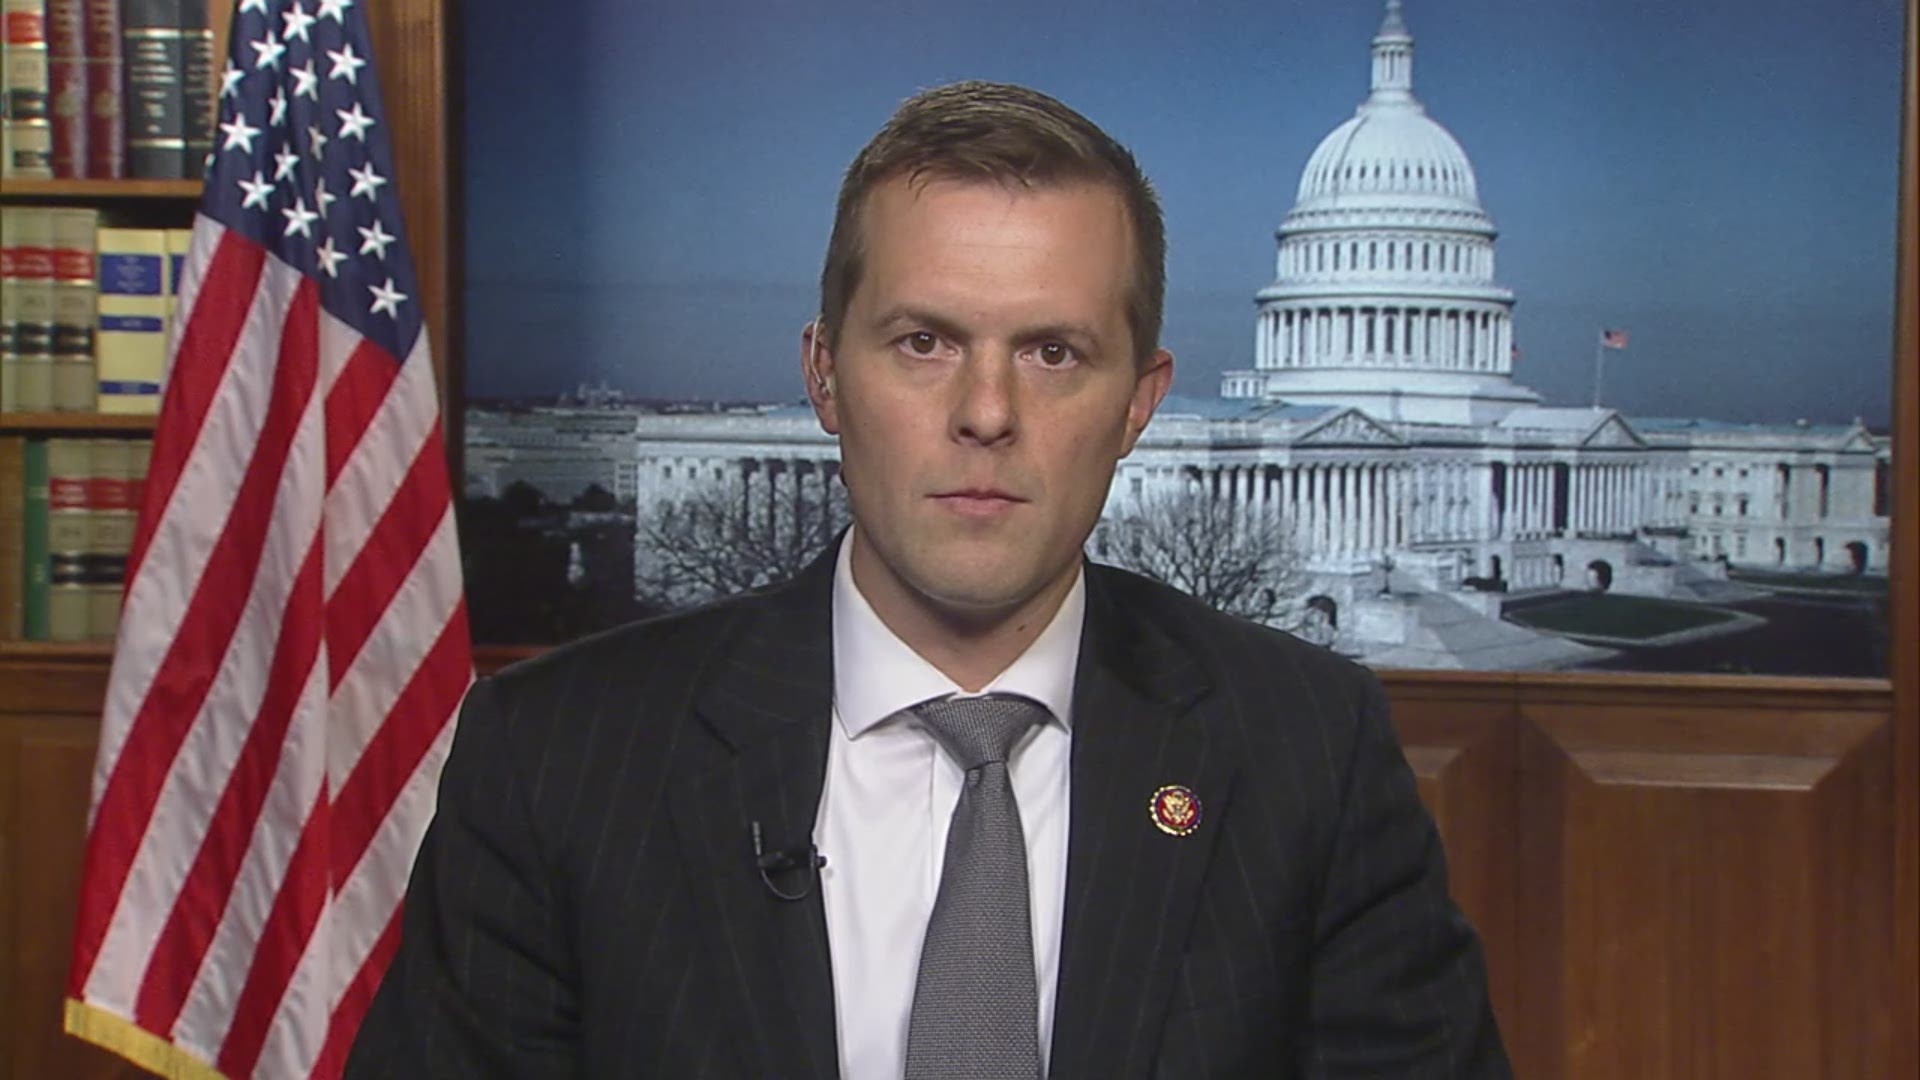 Rep. Jared Golden says he supports the U.S. House of Representatives resolution to formalize the impeachment inquiry into President Donald Trump.